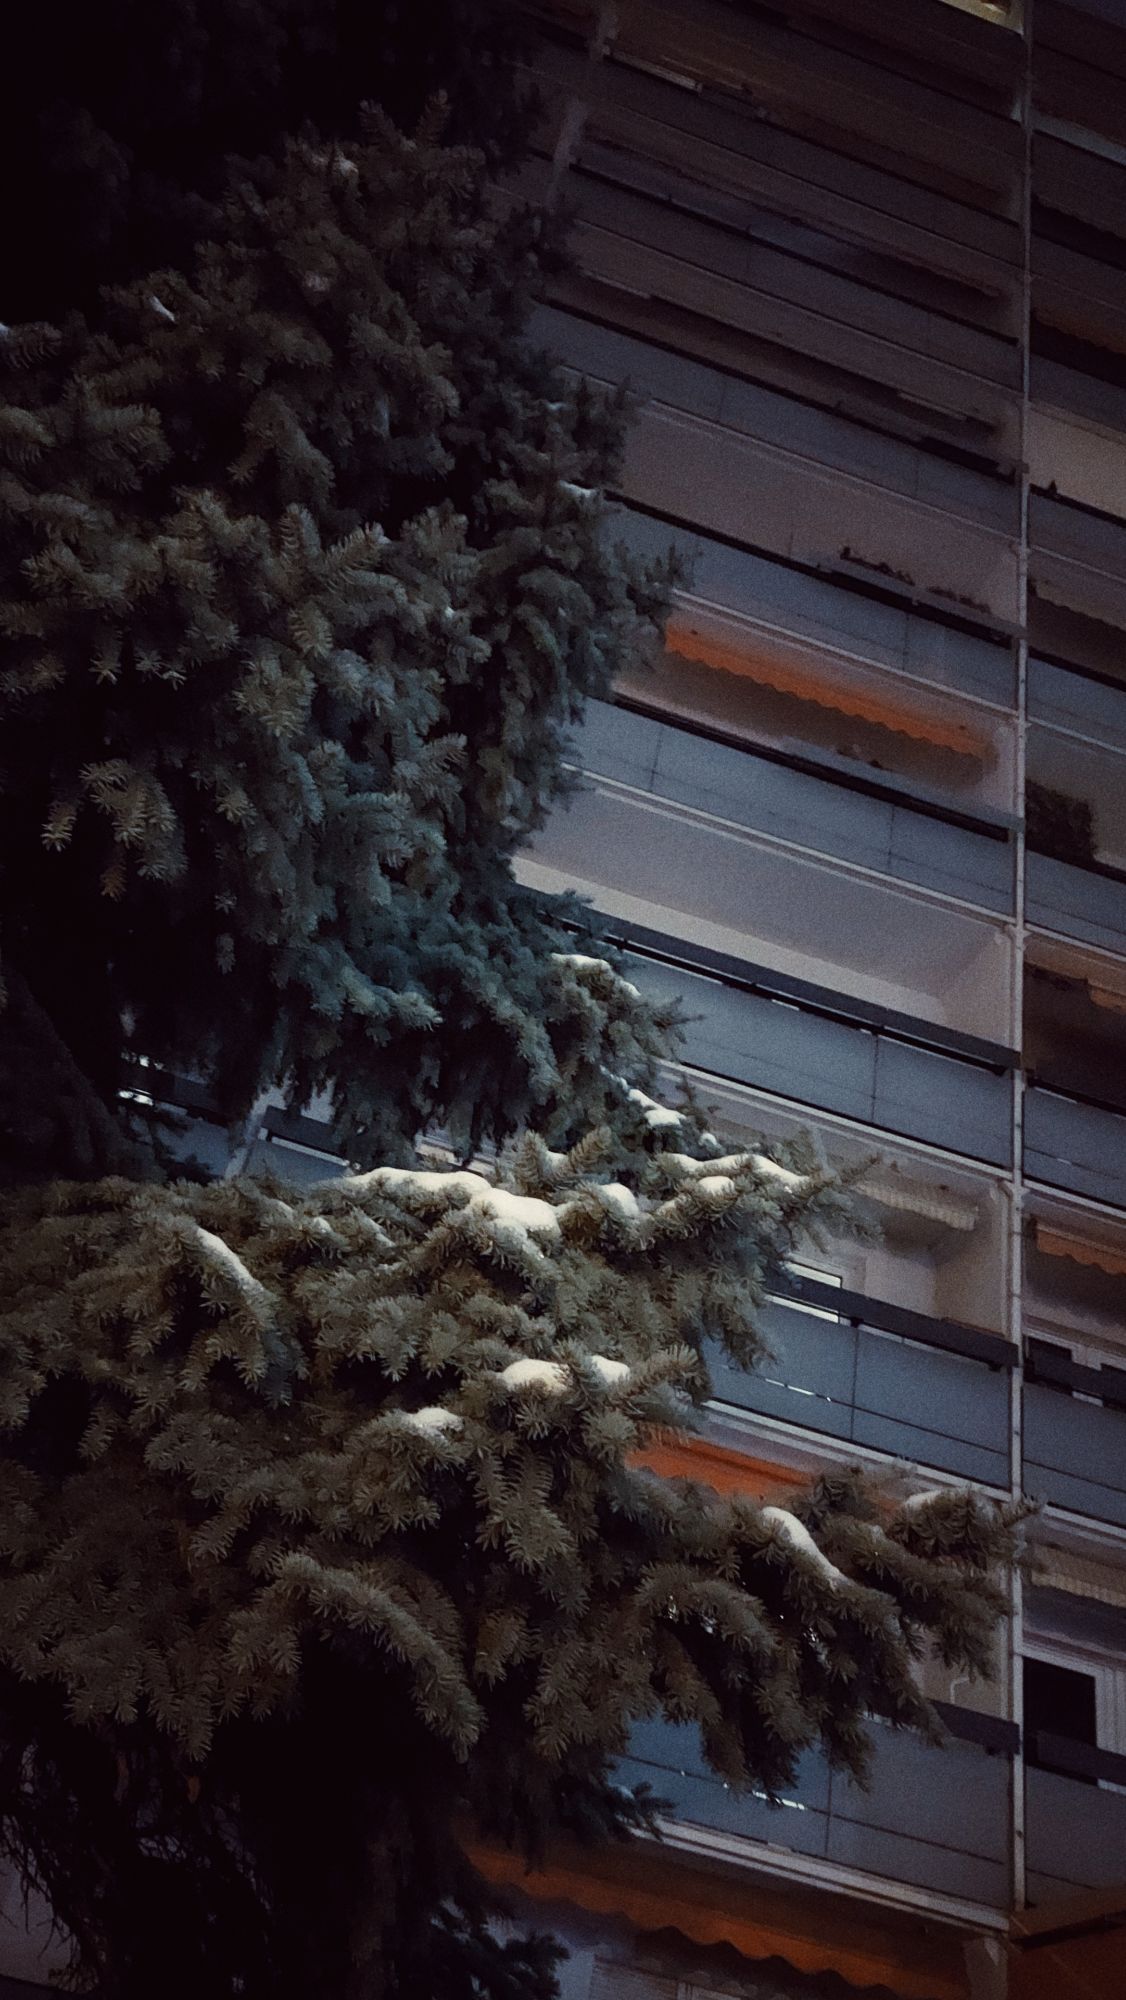 A snow-covered tree in front of balconies on a high-rise.